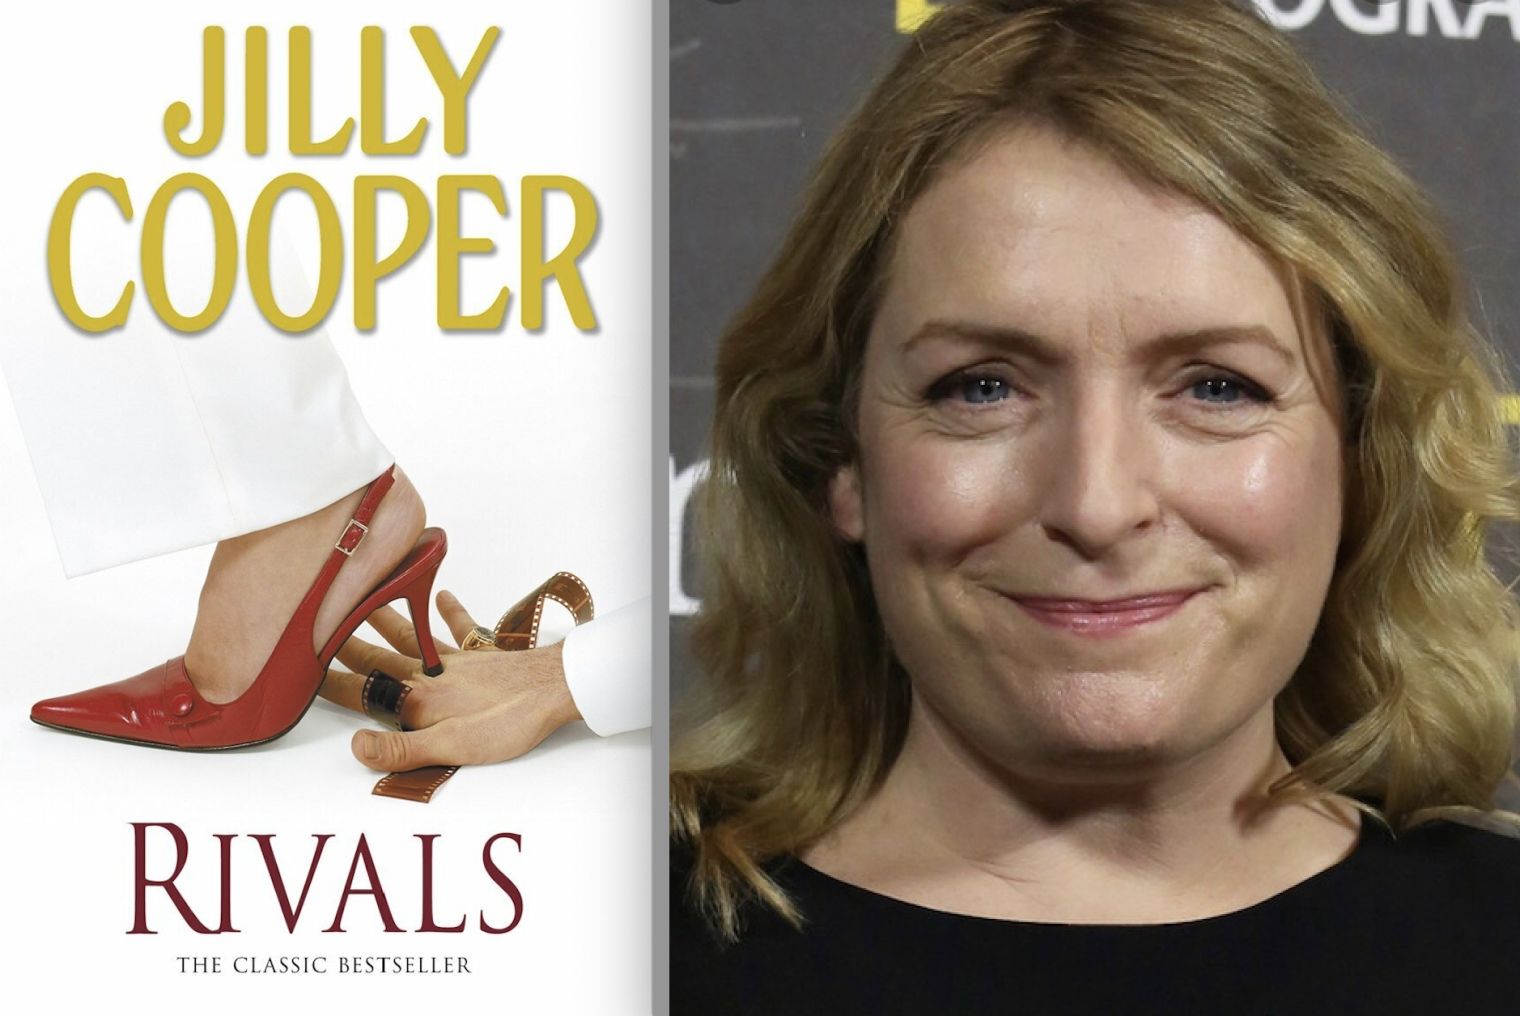 Claire Rushbrook will play Lady Monica Baddingham in a new Disney+ adaptation of Jilly Cooper’s Rivals